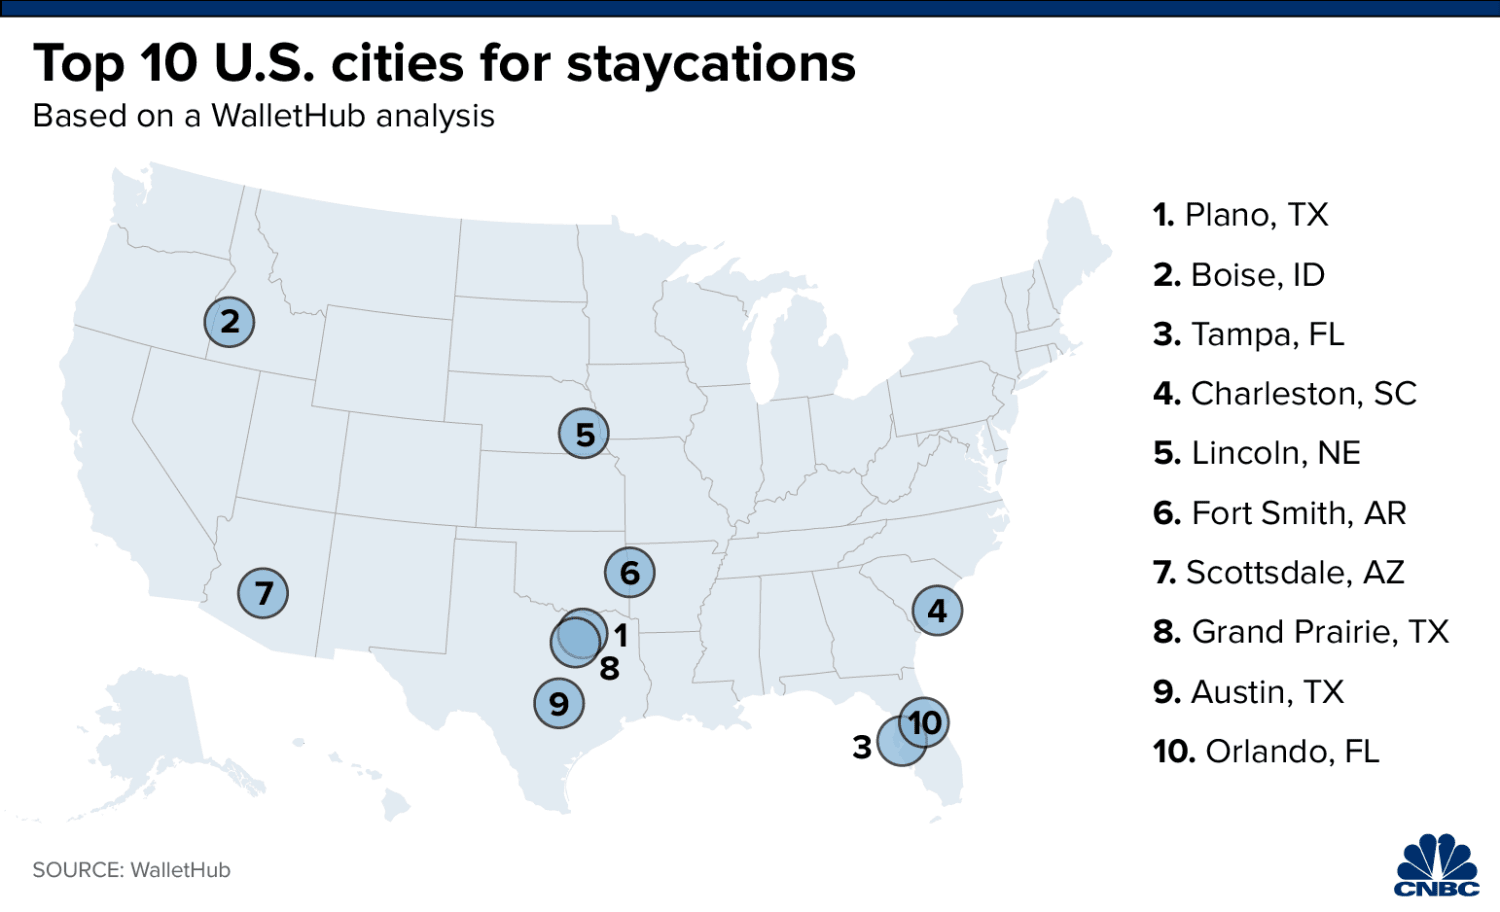 Here are the top 10 cities for summer staycations